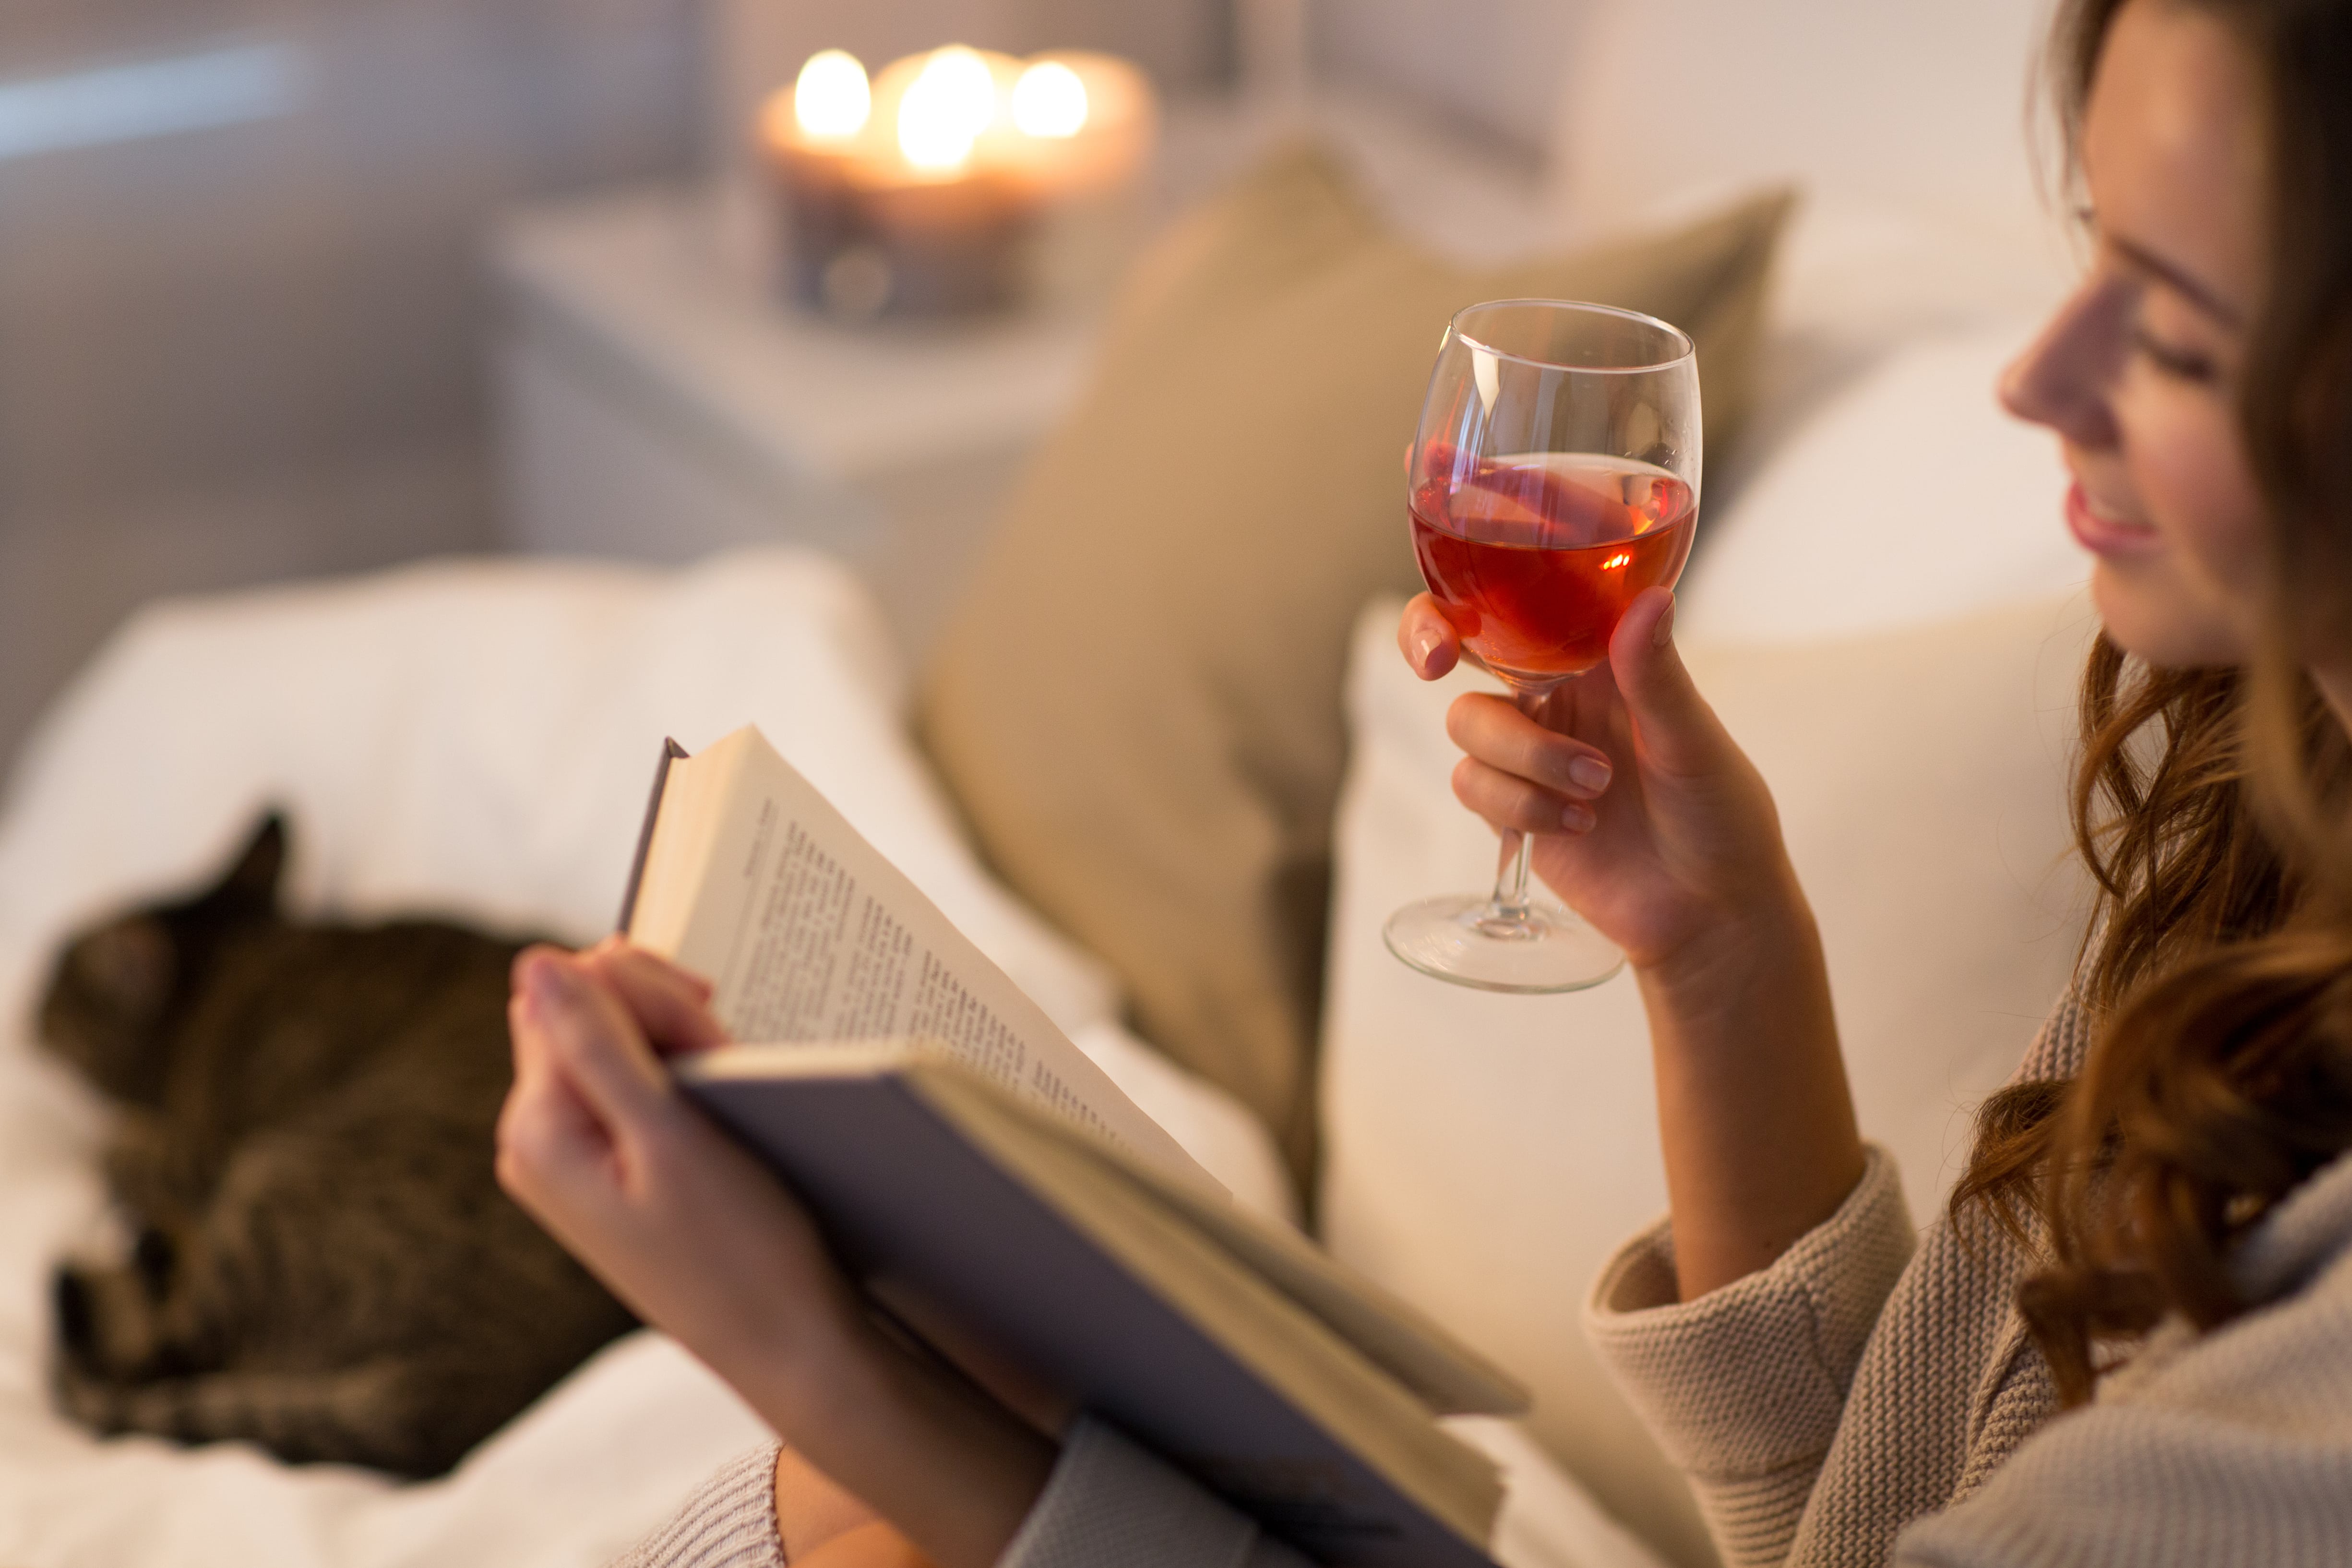 A smiling woman is relaxing, holding a book and a glass of rosé wine  A cat lies sleeping beside her and a four-wick candle glows in the background